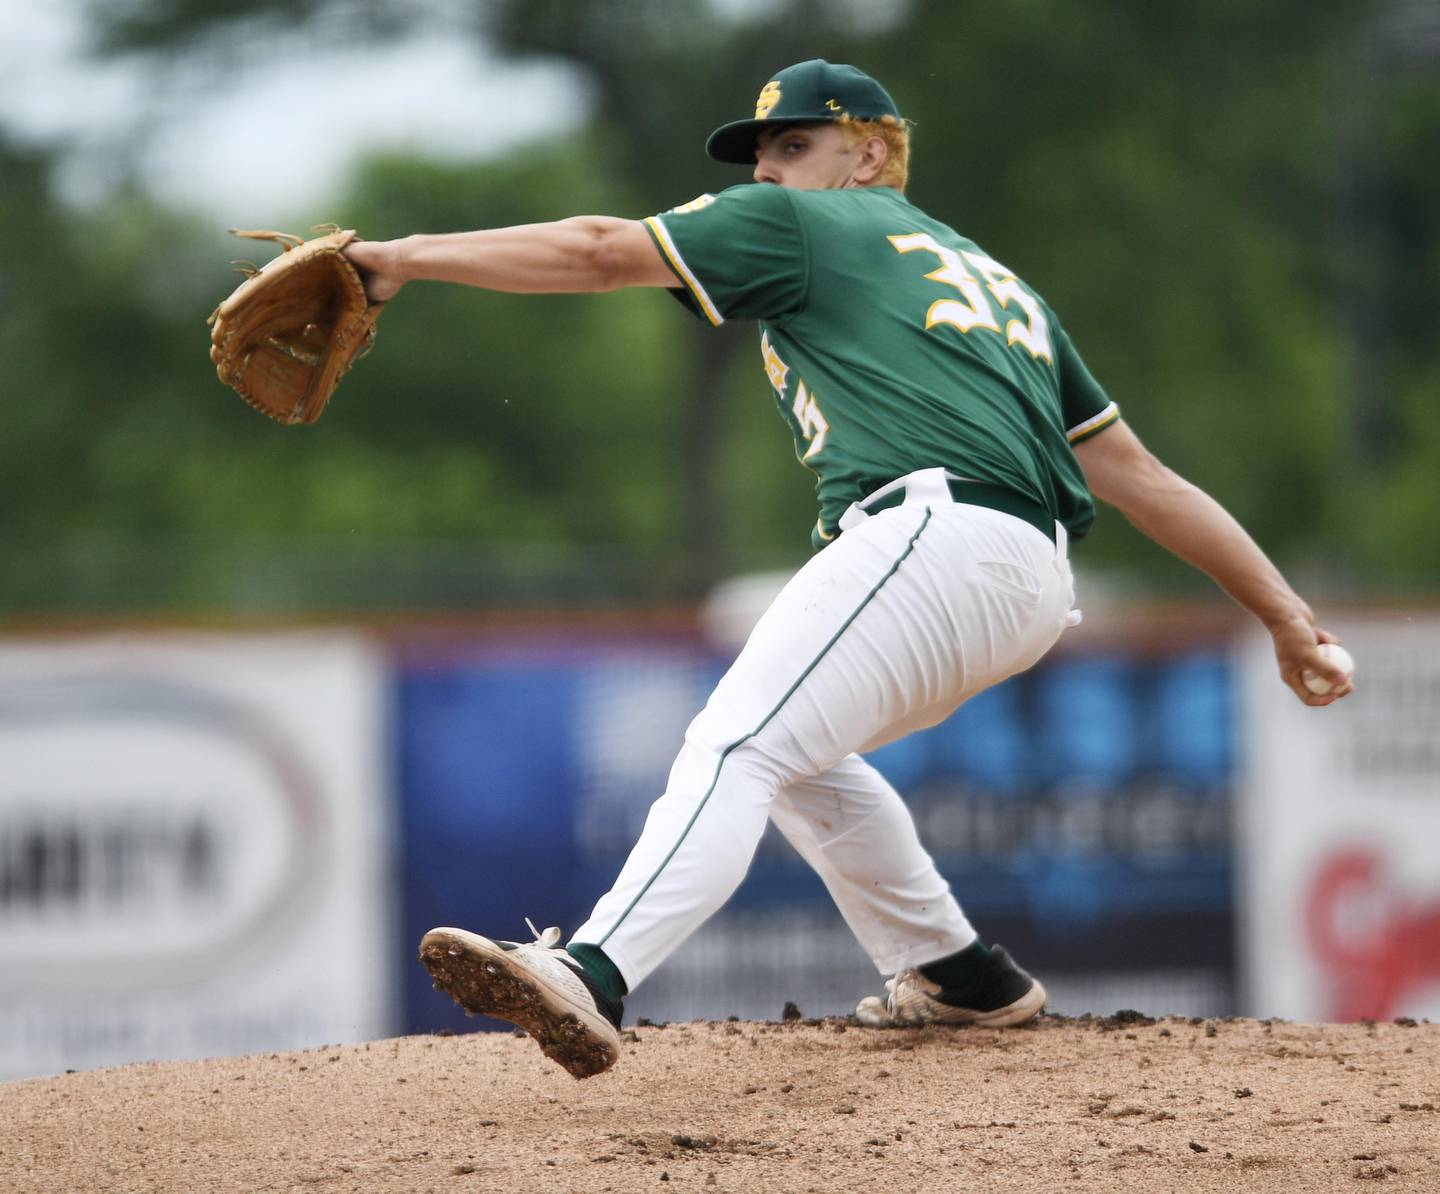 Crystal Lake South pitcher Ysen Useni throws against Fenwick in the 3A supersectional baseball game at Wintrust Field in Schaumburg on Monday, June 6, 2022.